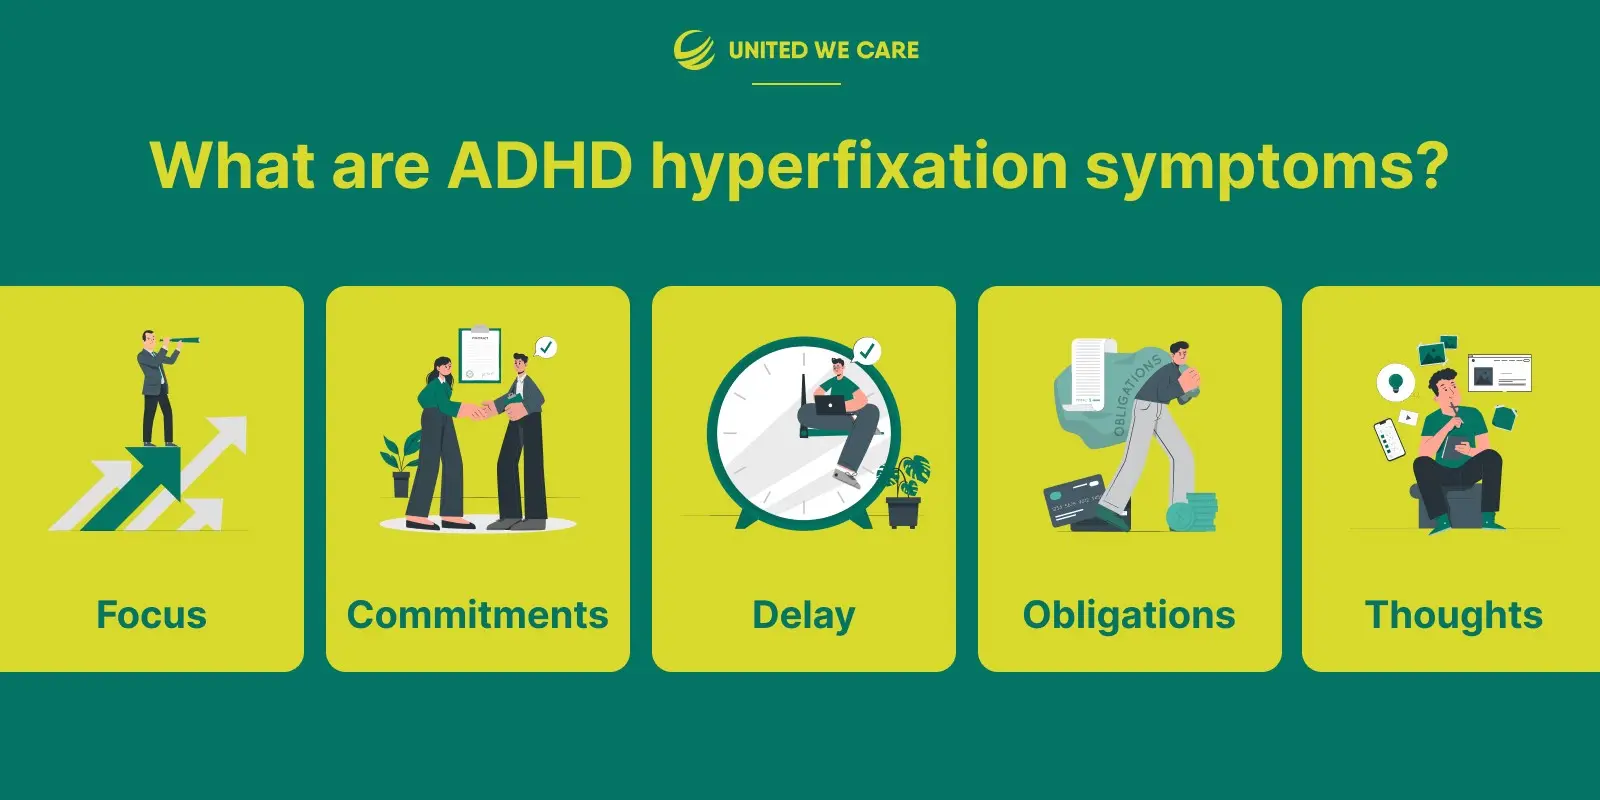 What are ADHD hyperfixation symptoms?